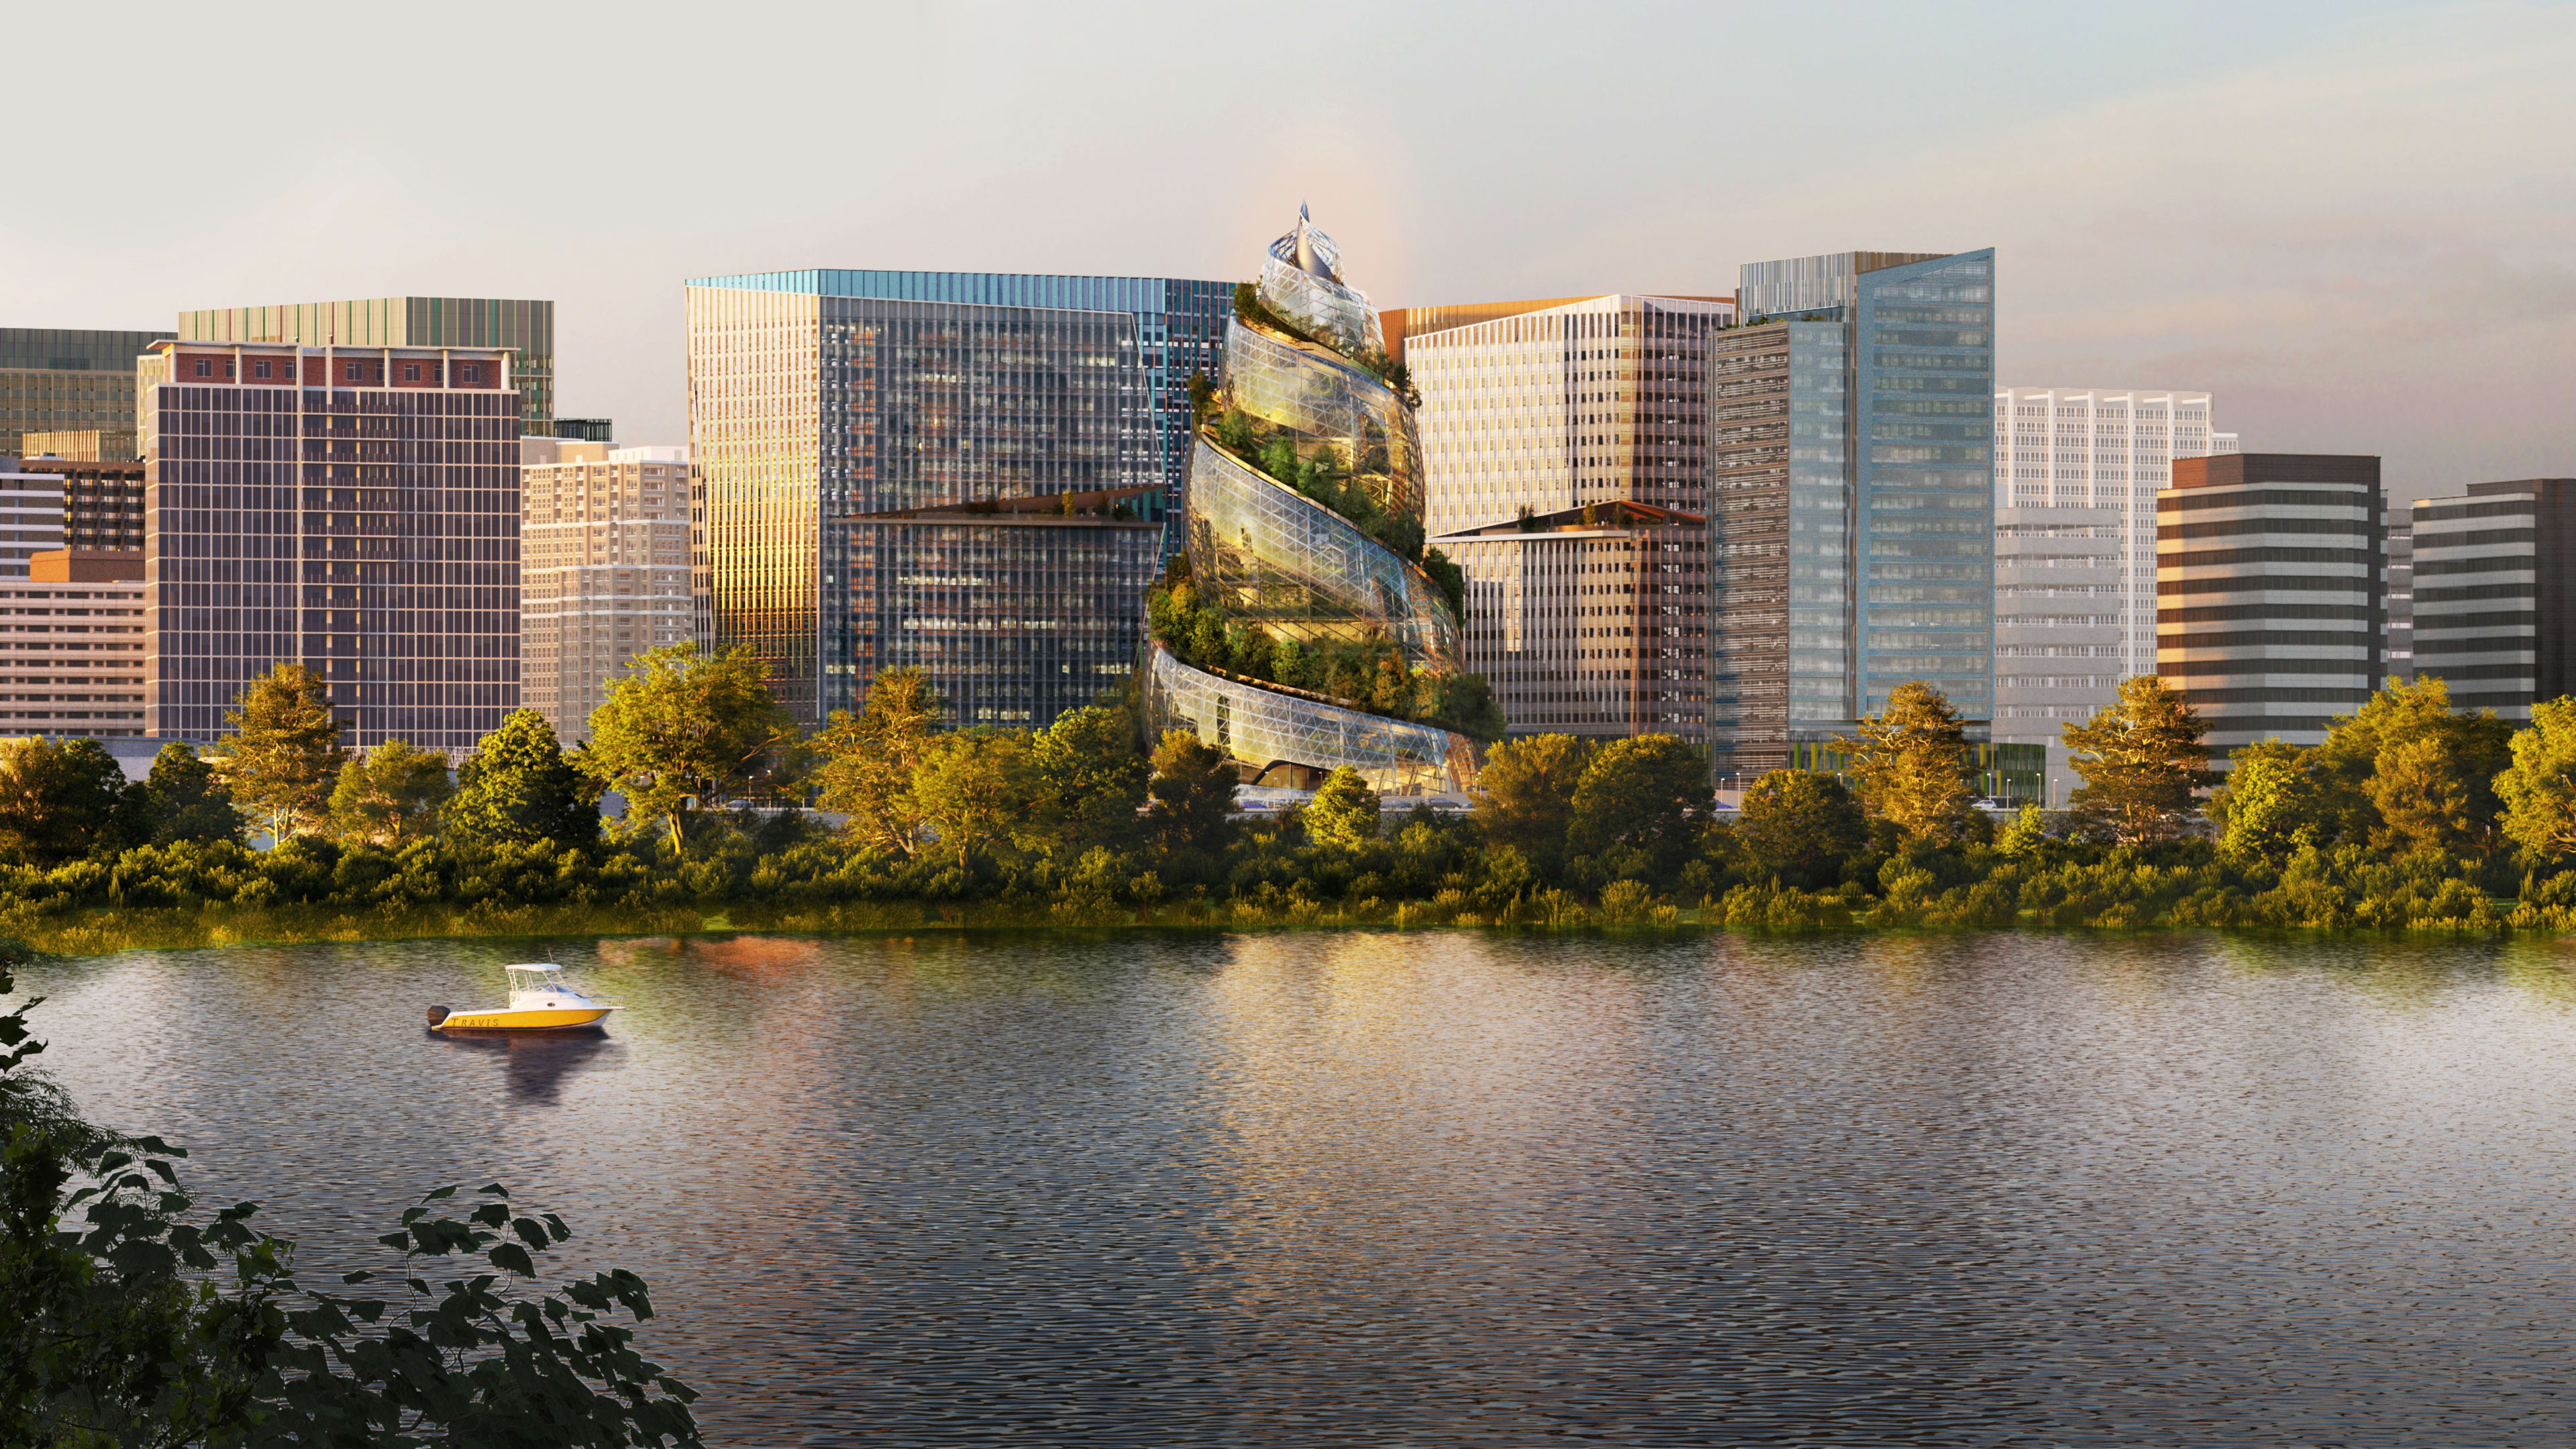 First look: Amazon’s jaw-dropping new HQ2 looks like a glass mountain